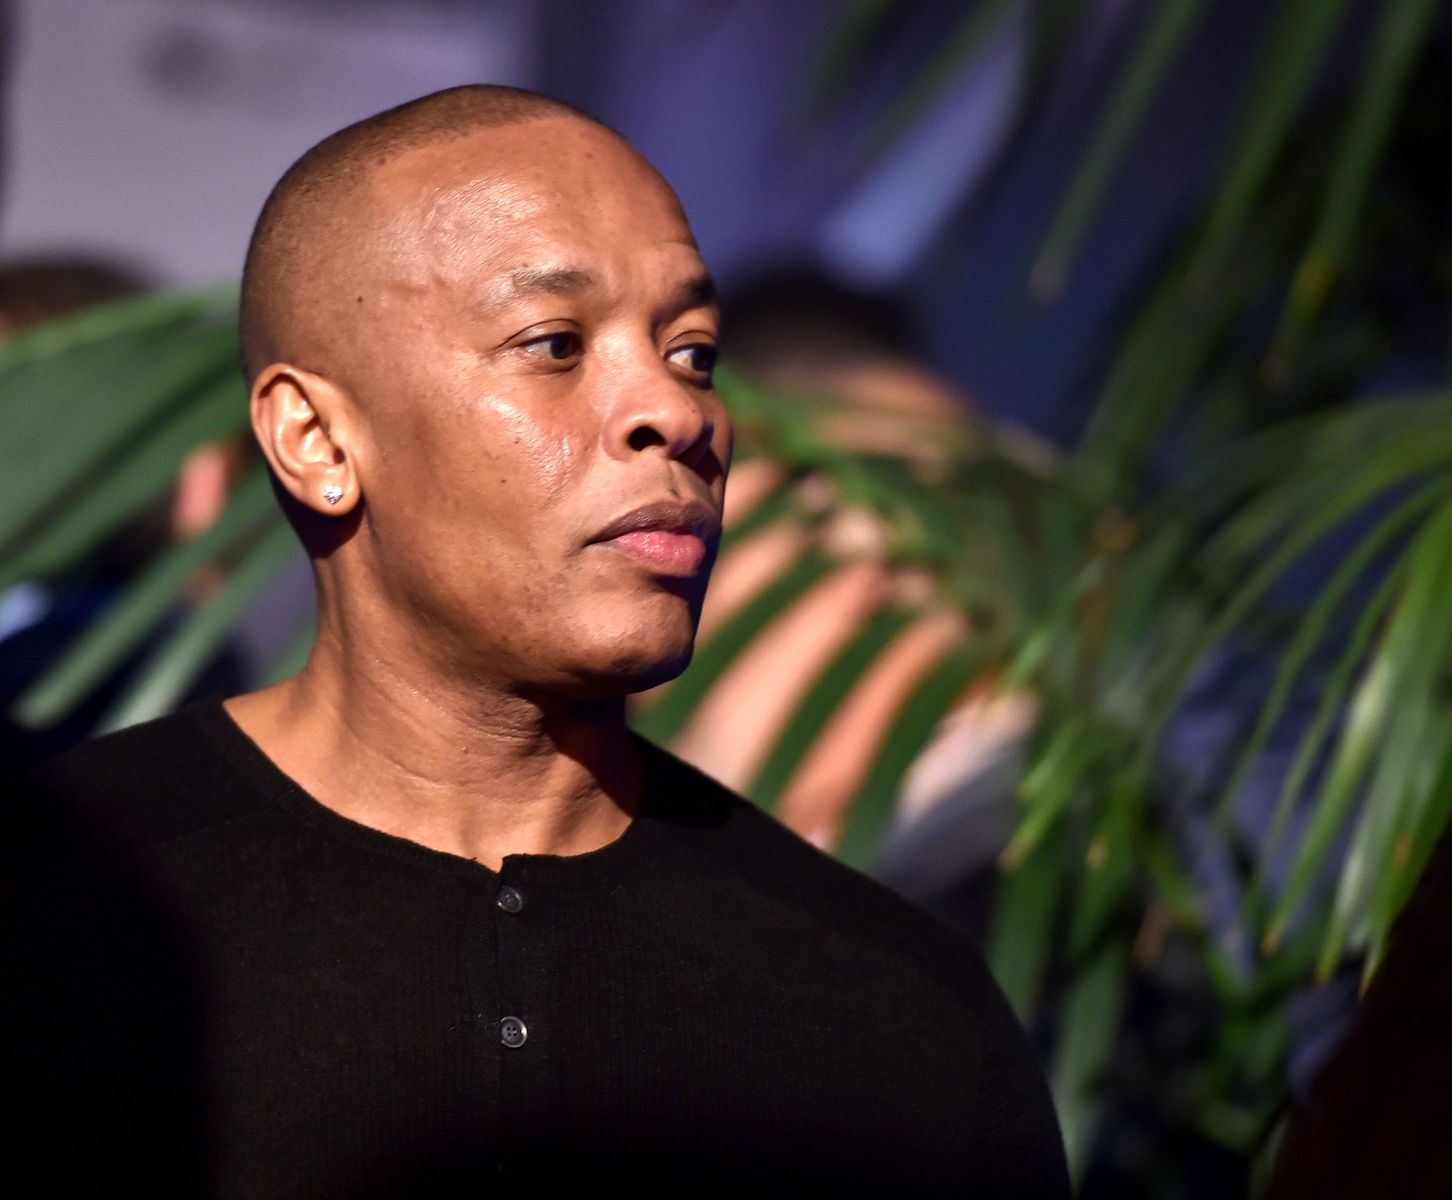 Dr. Dre at the after-party for the premiere of "Straight Outta Compton" on August 10, 2015. | Photo: Getty Images